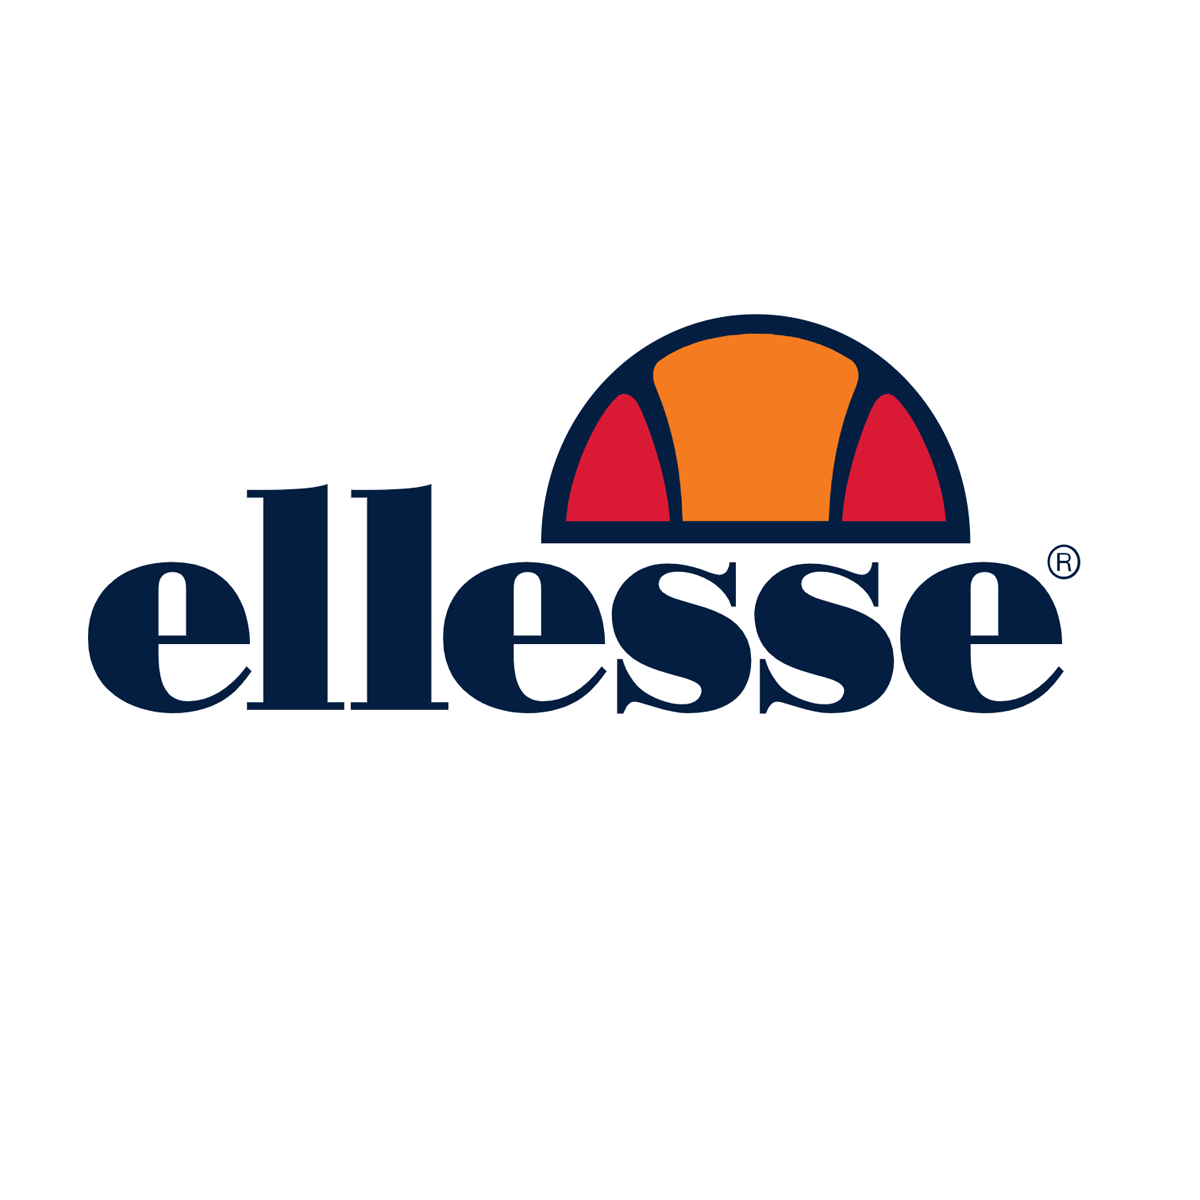 Ellesse Coupons & Promo Codes